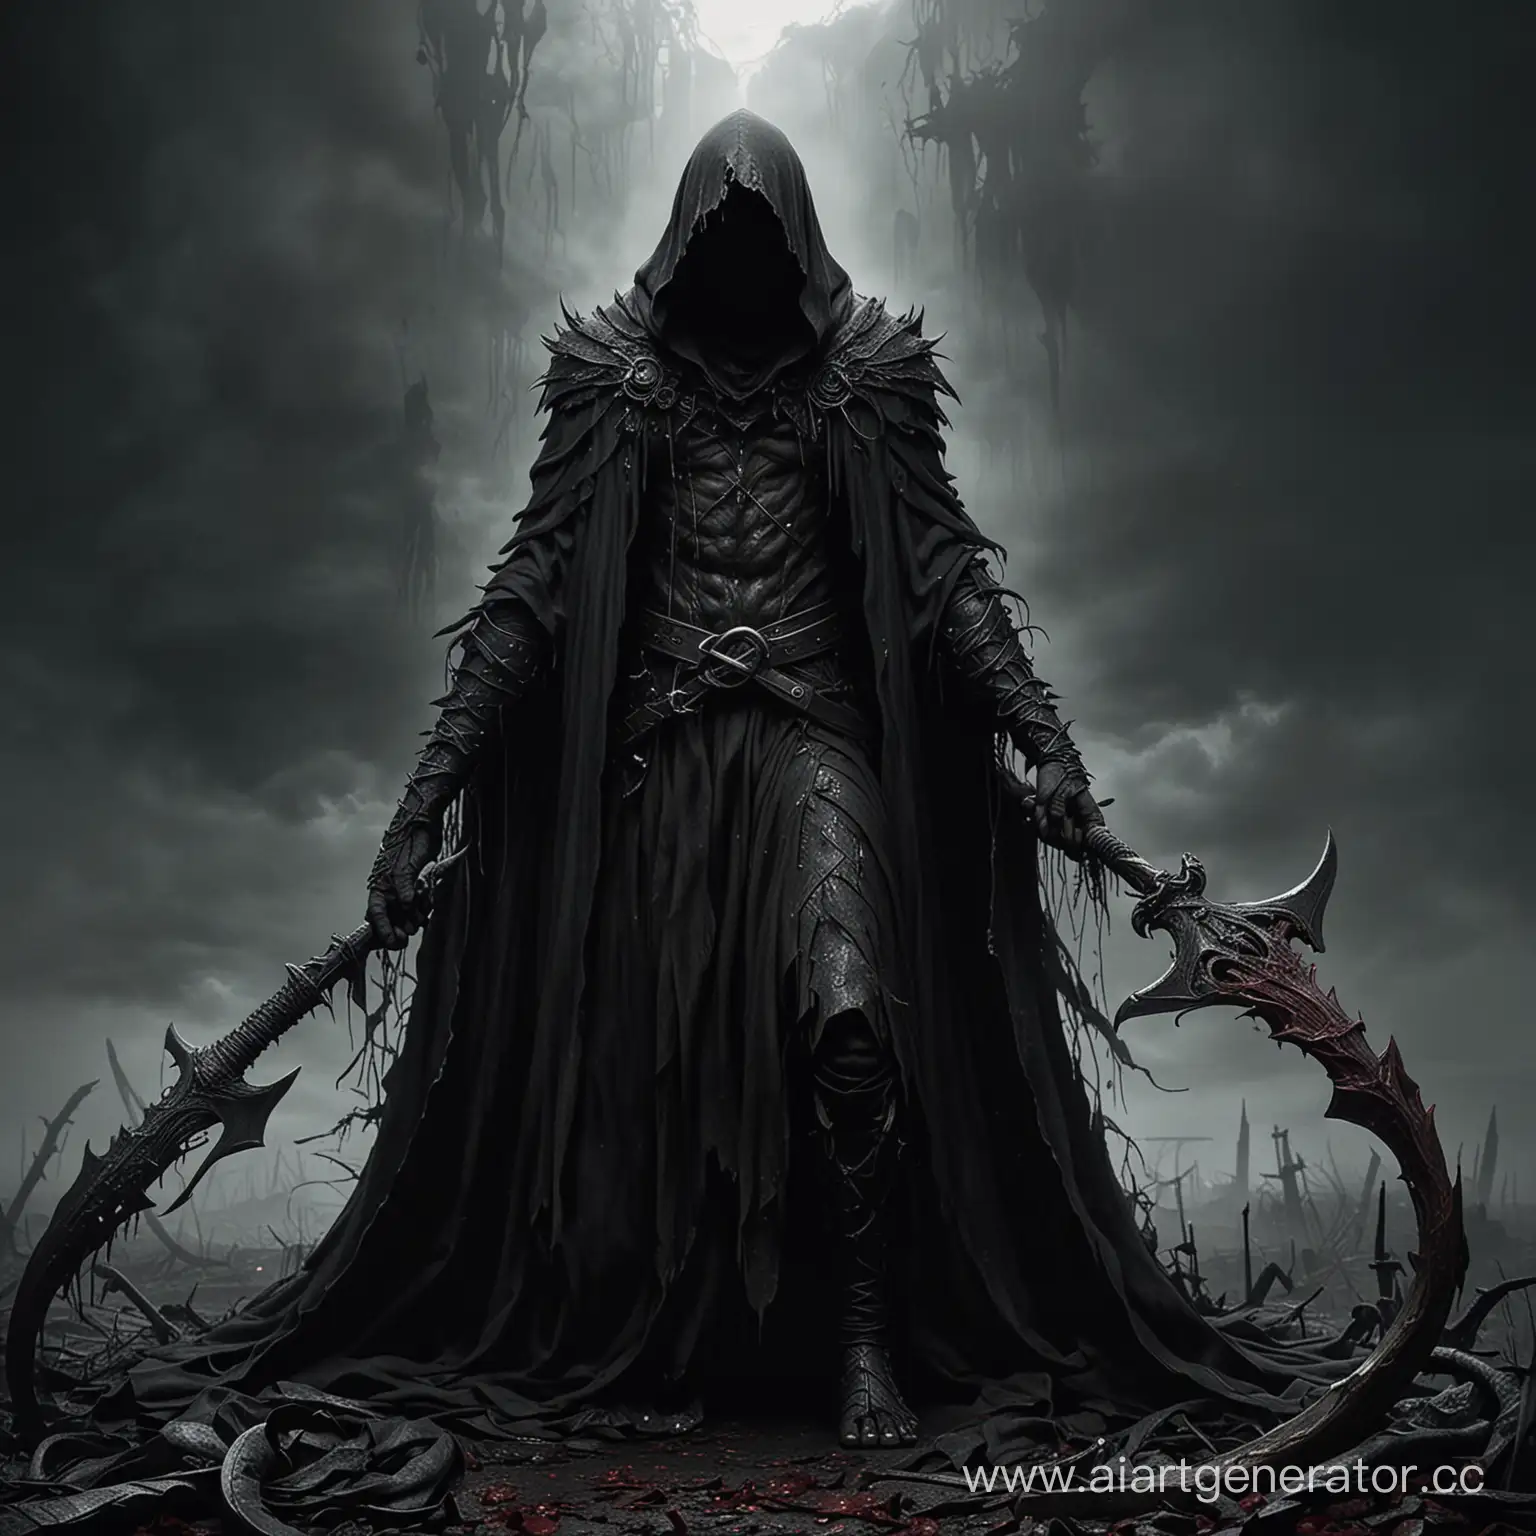 Grim-Reaper-Emerges-from-the-Abyss-with-BloodStained-Cloak-and-Scythe